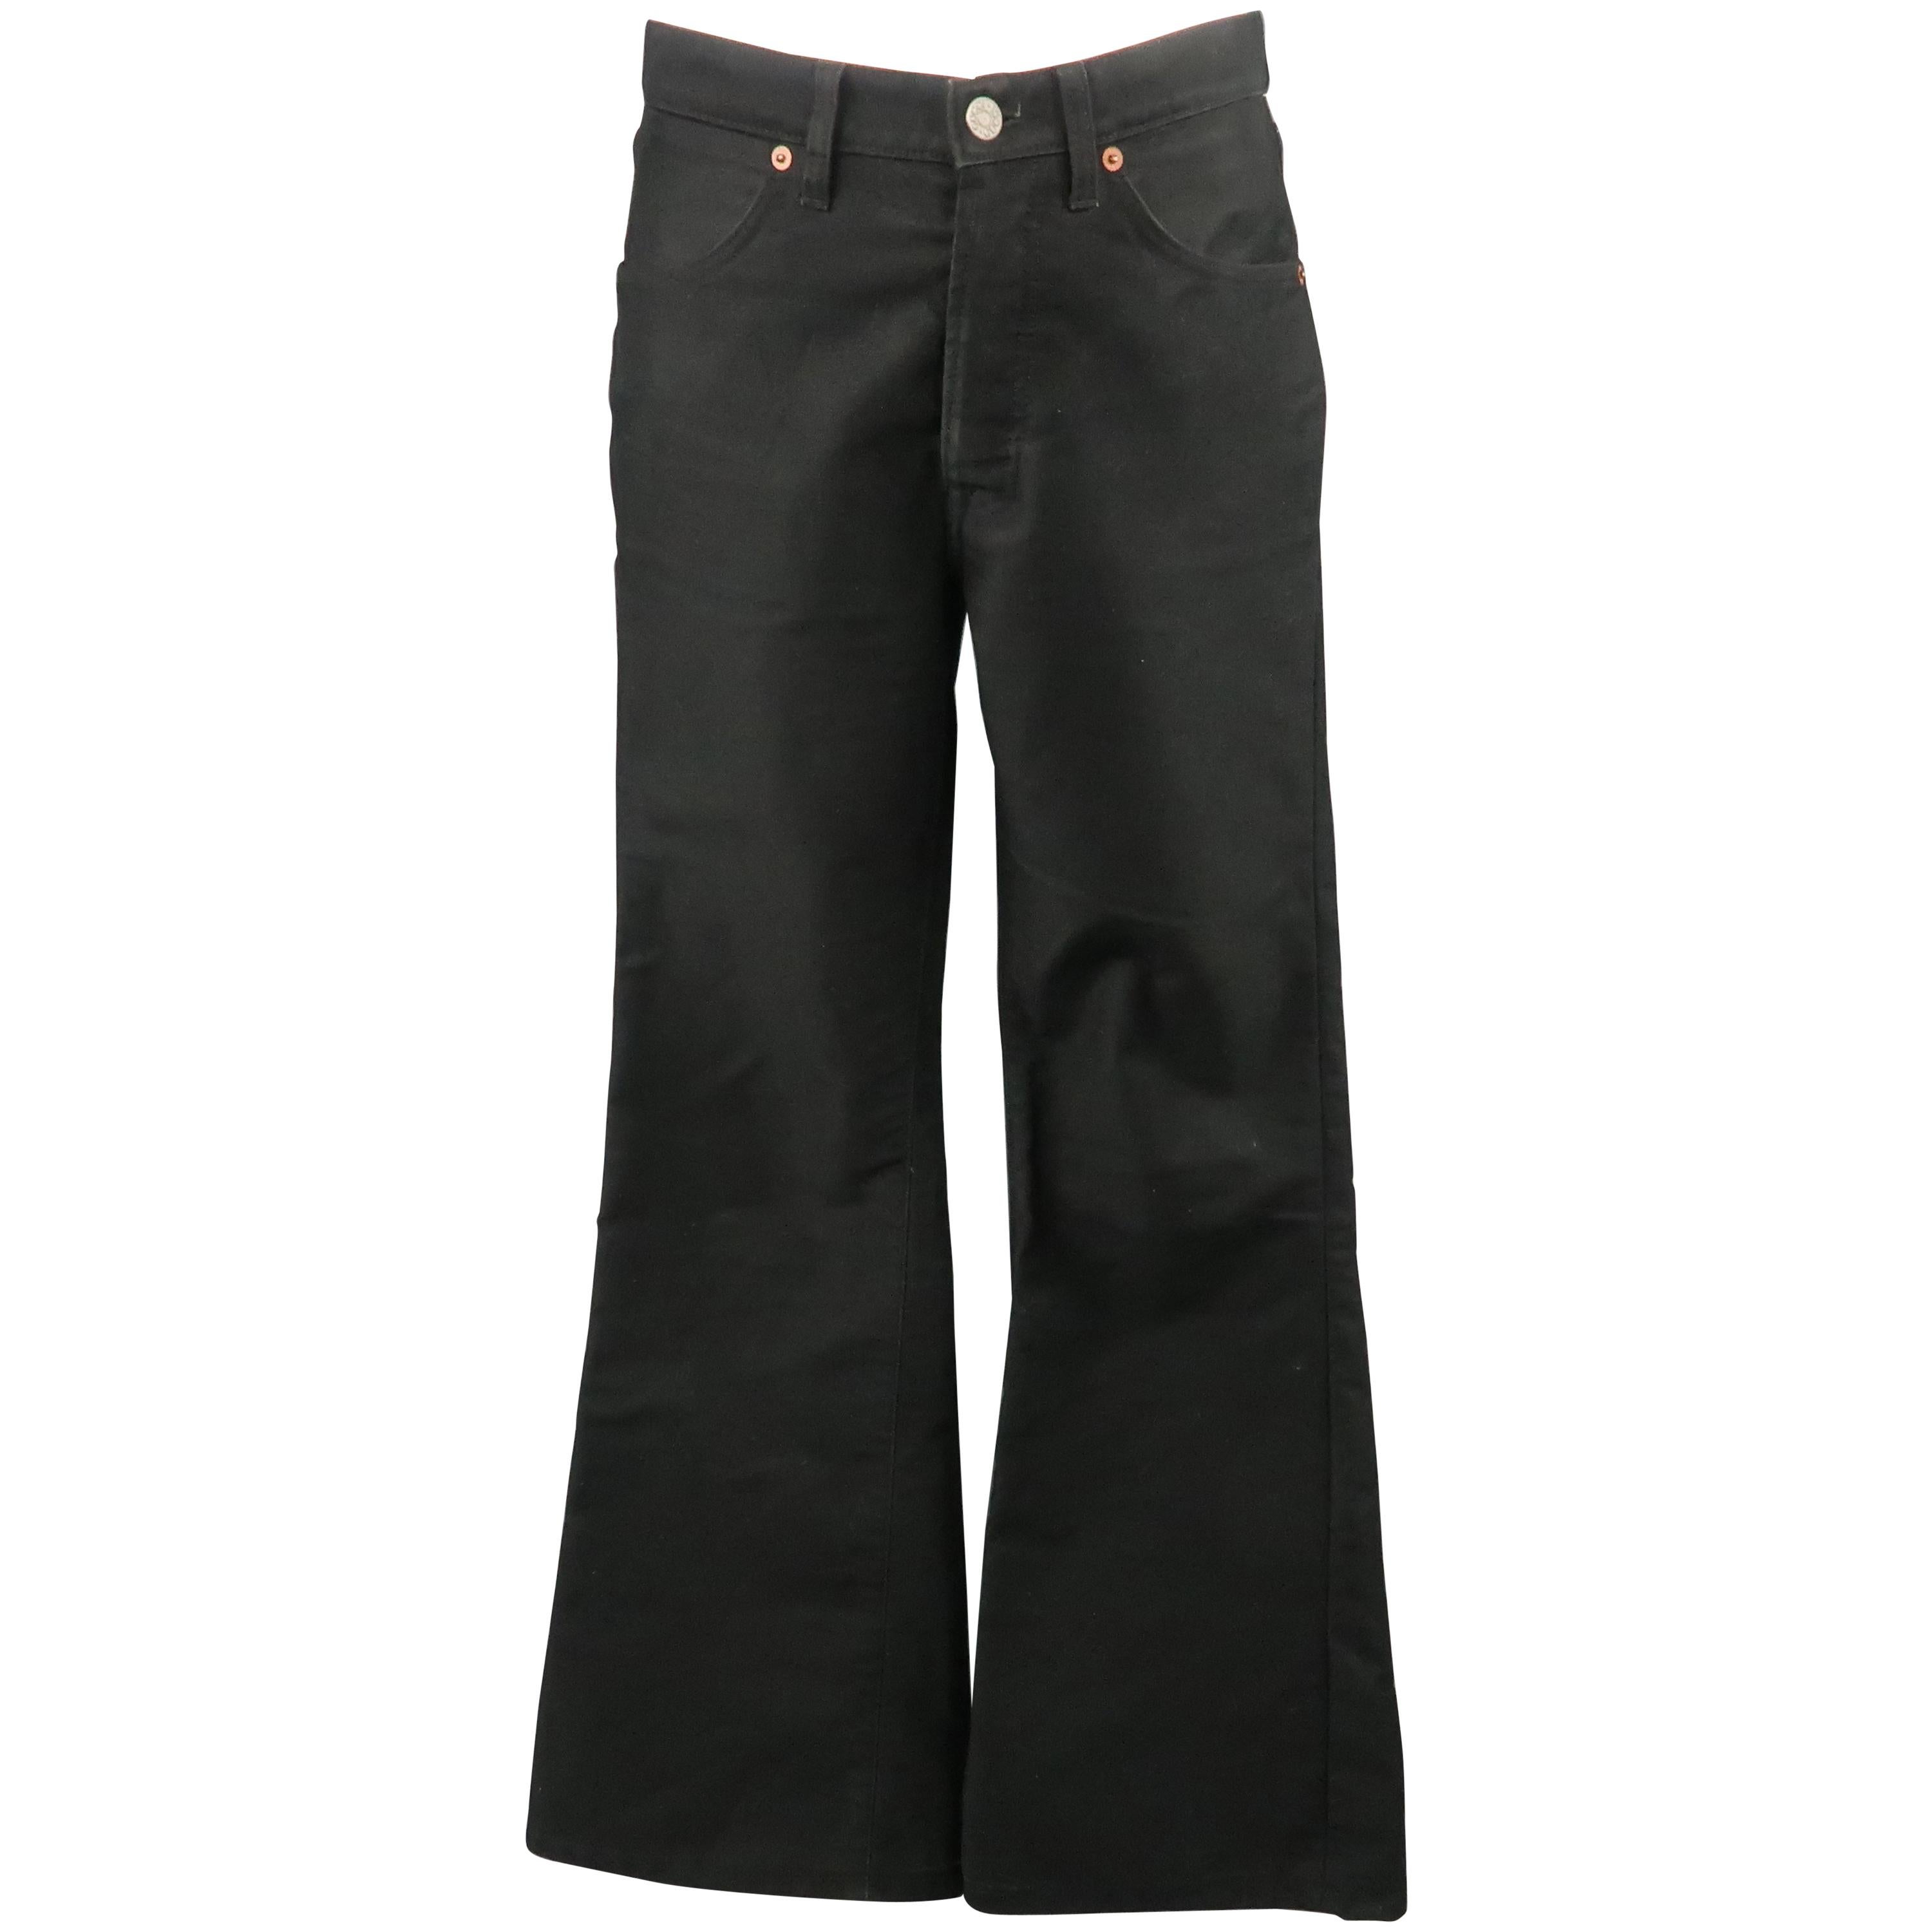 GUCCI by TOM FORD Size 29 Black Cotton Flared Bell Bottom Jeans at ...